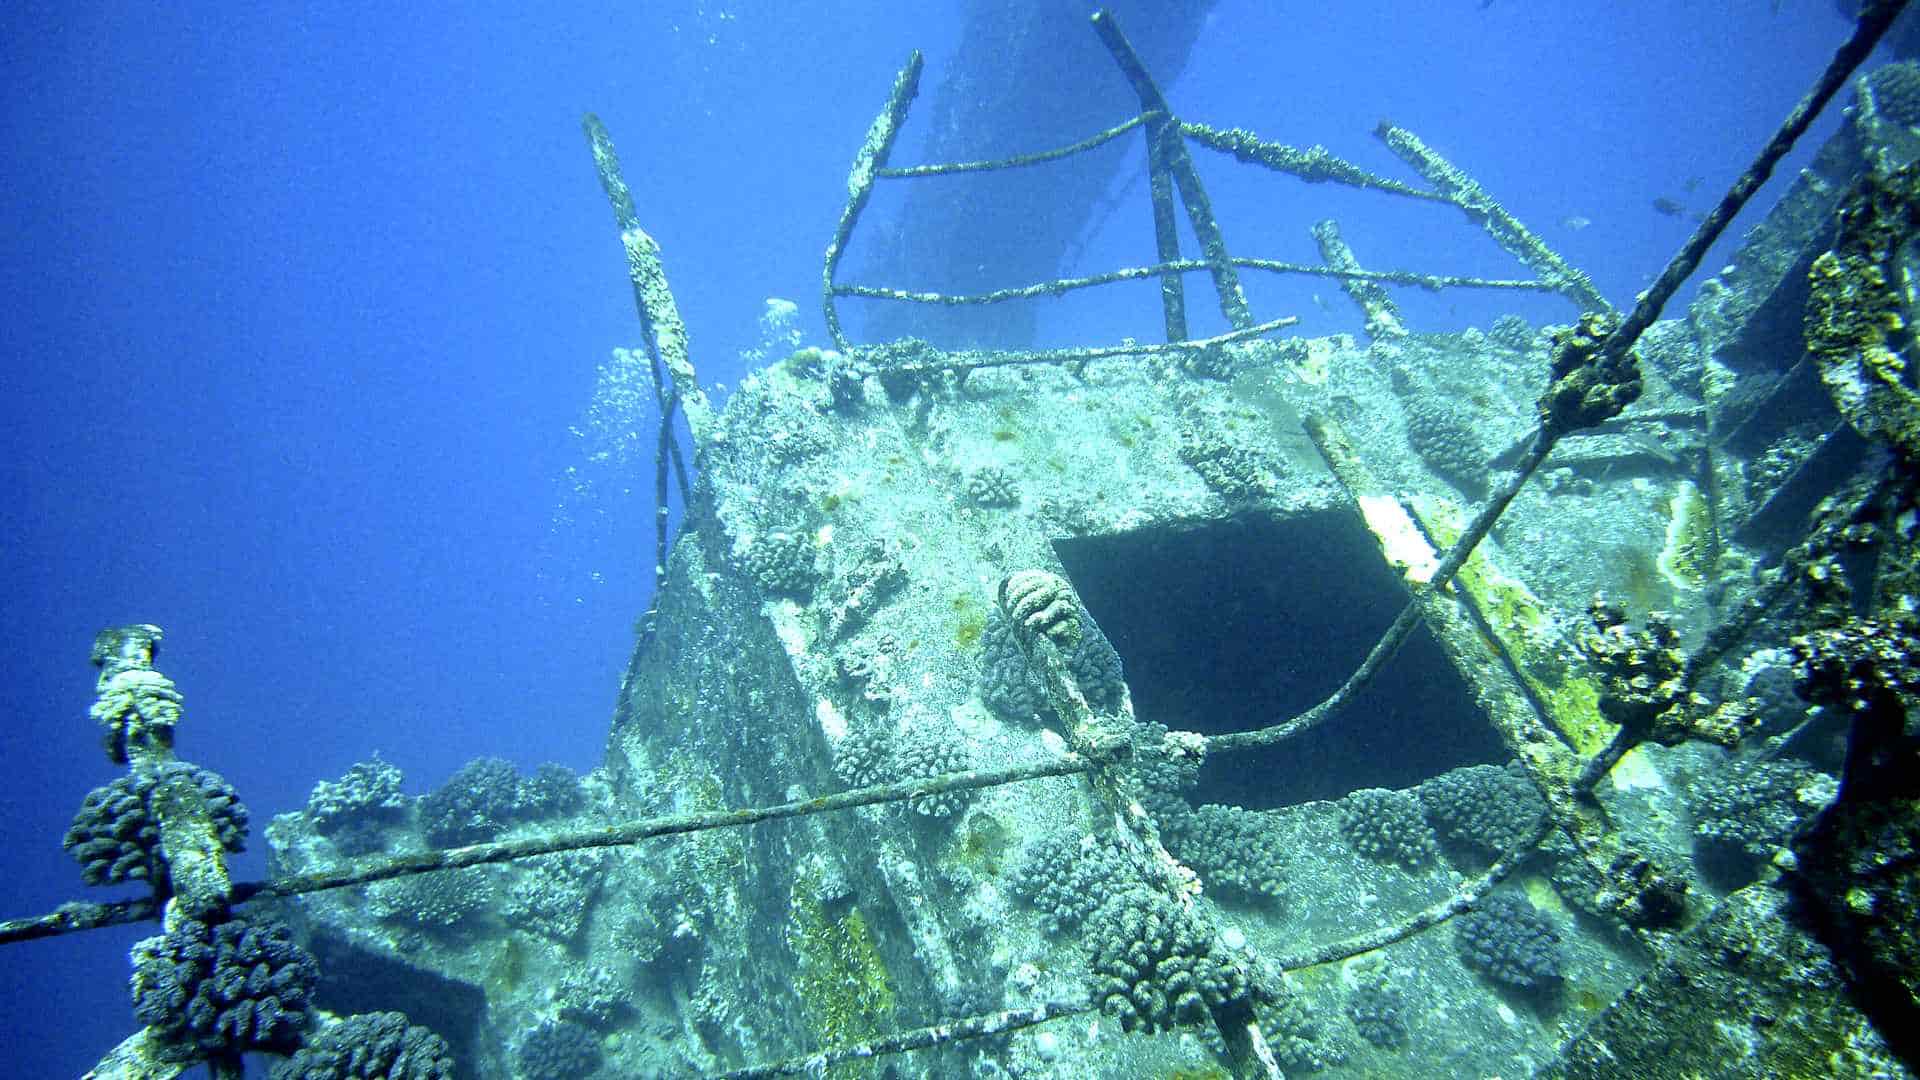 Shipwreck on its side underwater